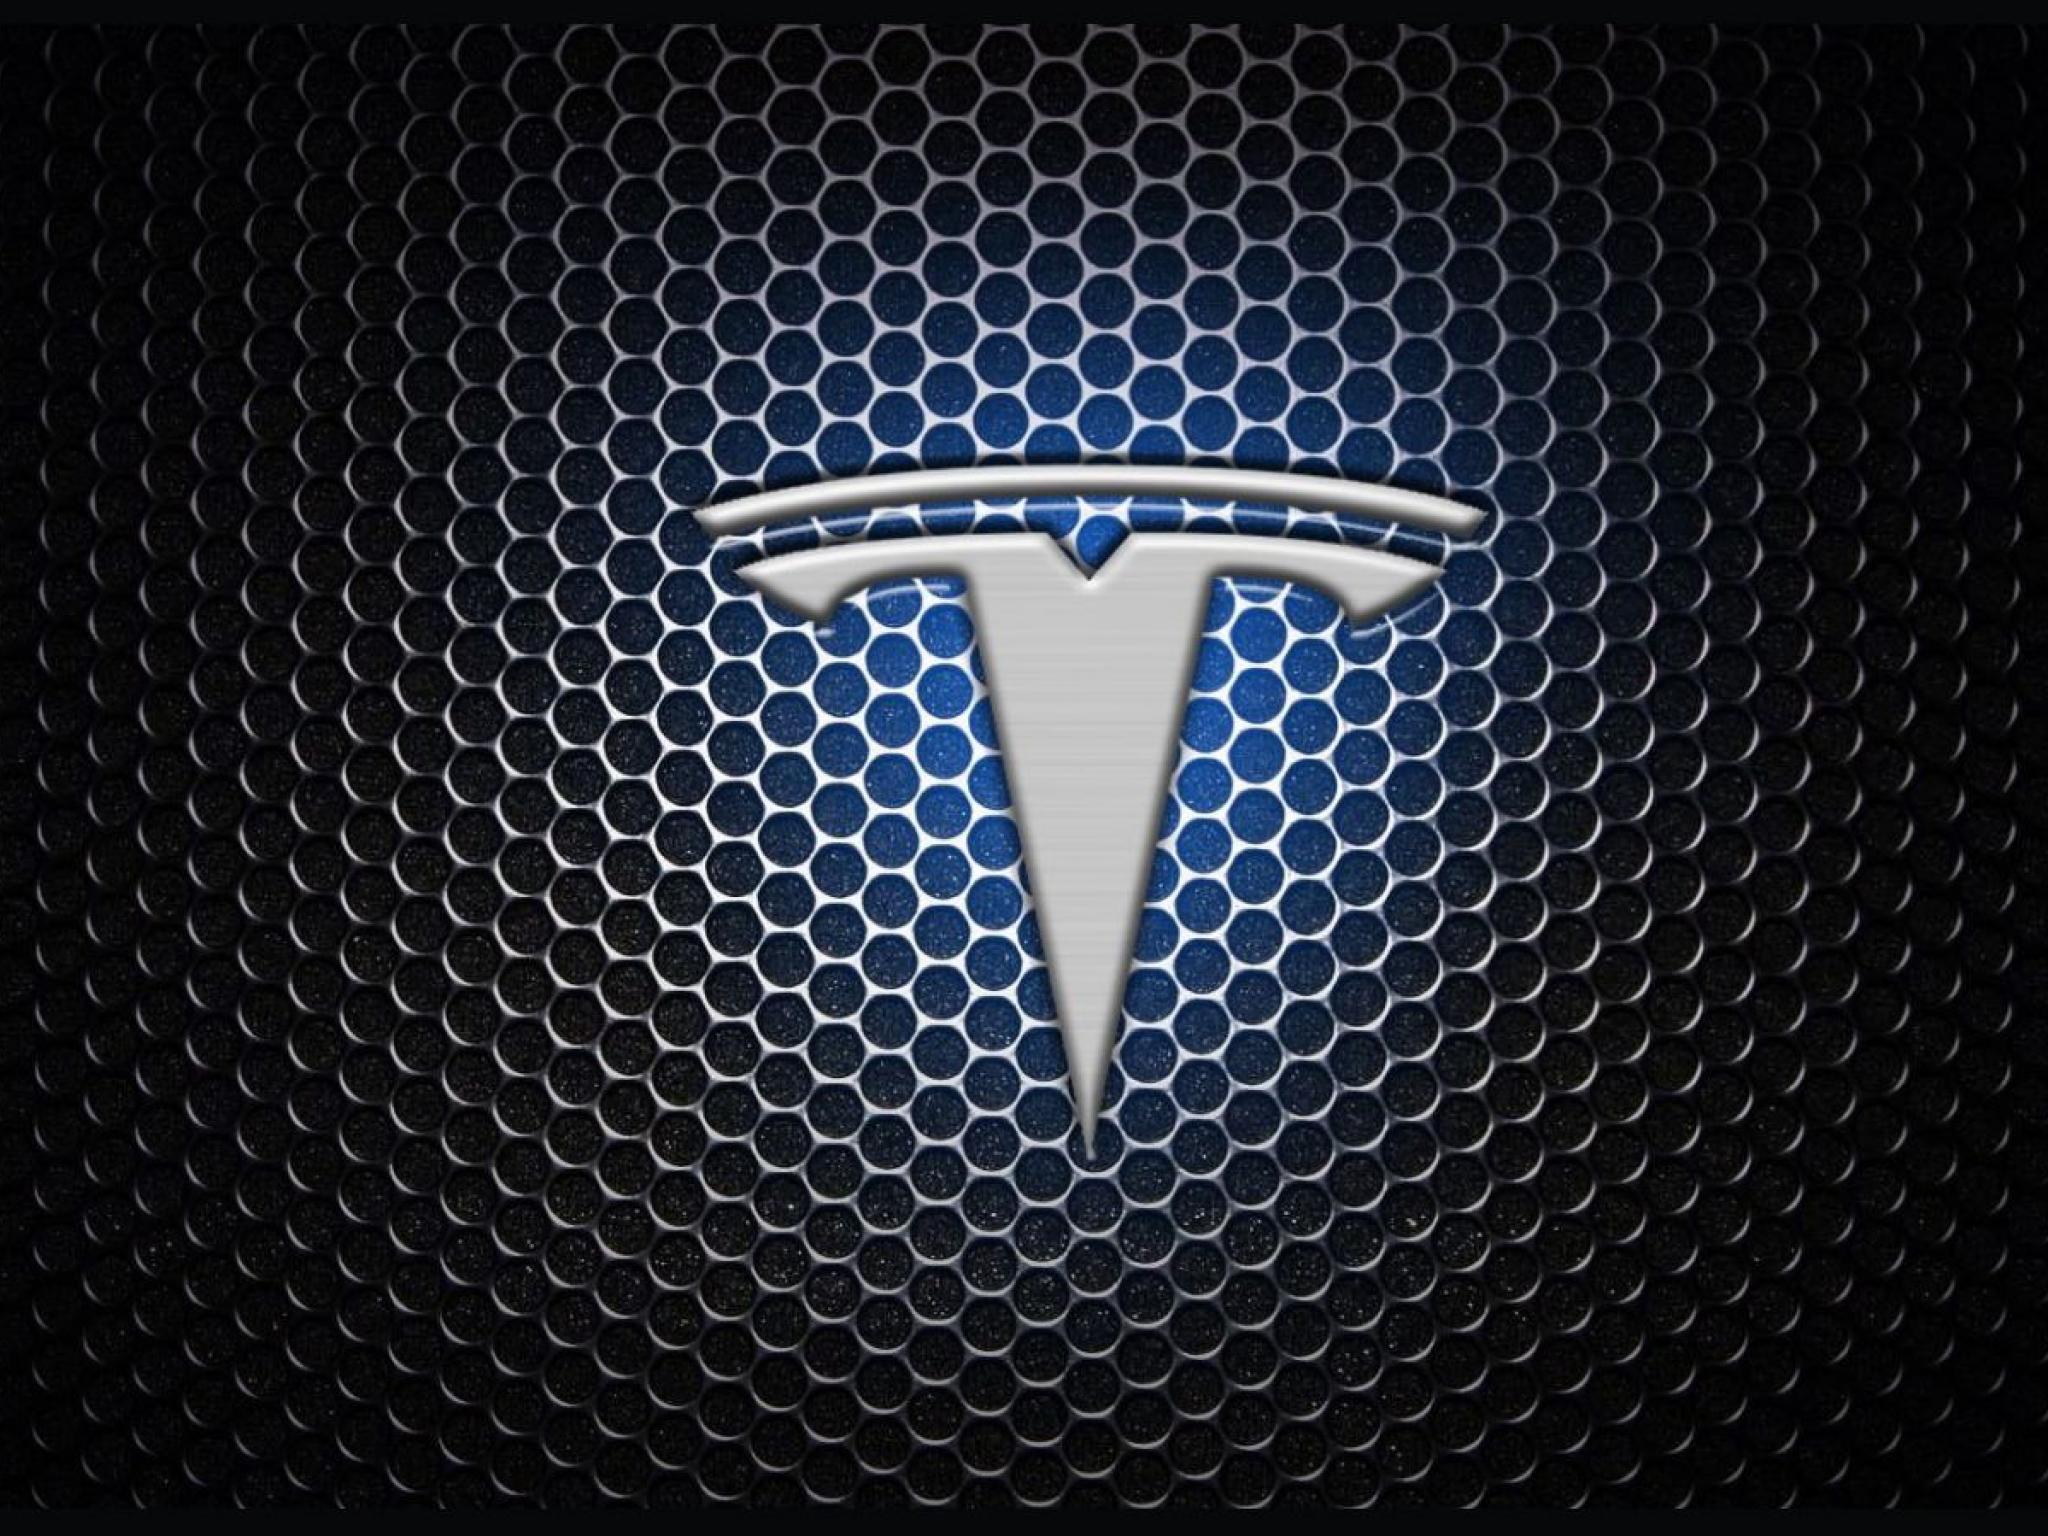  tesla-to-120-here-are-10-top-analyst-forecasts-for-tuesday 